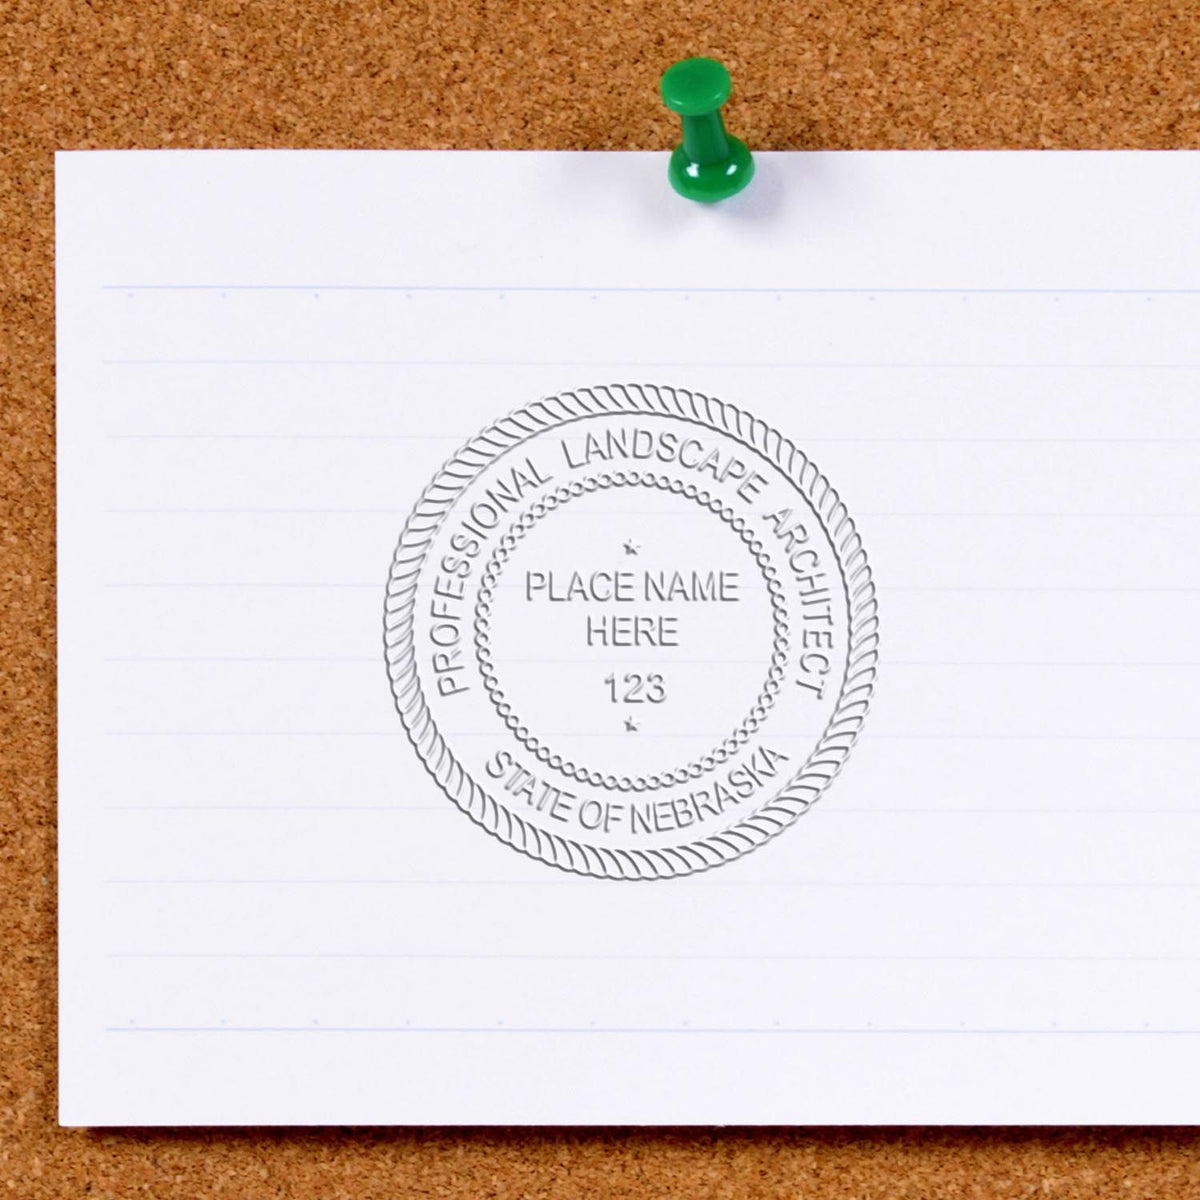 An alternative view of the Hybrid Nebraska Landscape Architect Seal stamped on a sheet of paper showing the image in use